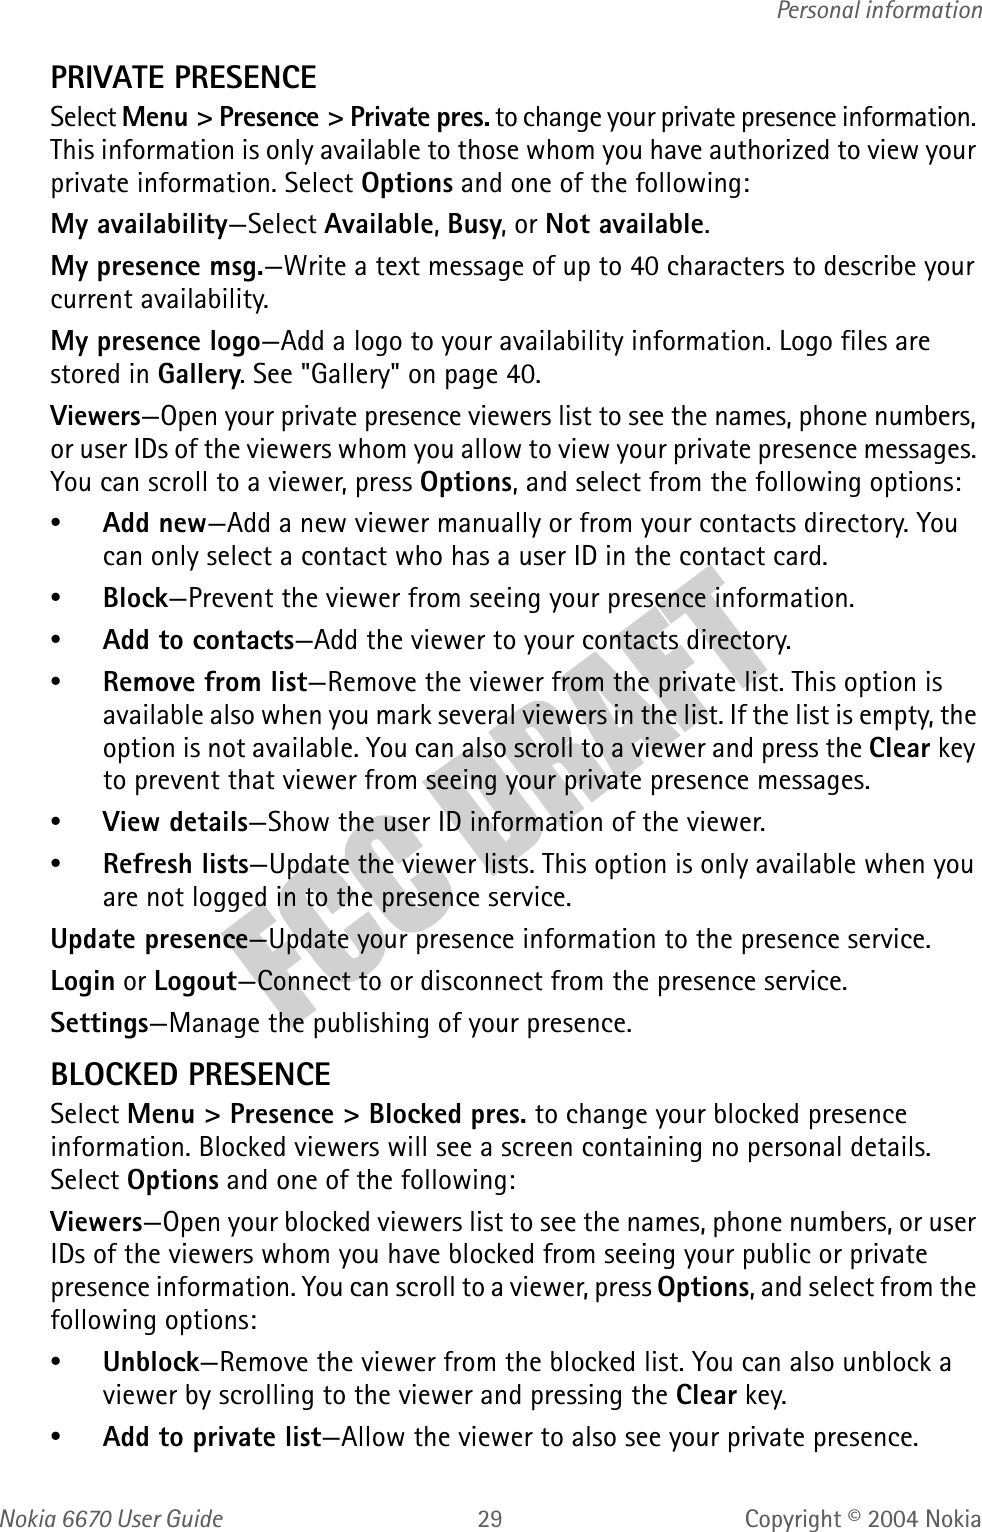 Nokia  User GuideCopyright © 2004 NokiaPersonal informationPRIVATE PRESENCESelect Menu &gt; Presence &gt; Private pres. to change your private presence information. This information is only available to those whom you have authorized to view your private information. Select Options and one of the following:My availability—Select Available, Busy, or Not available.My presence msg.—Write a text message of up to 40 characters to describe your current availability. My presence logo—Add a logo to your availability information. Logo files are stored in Gallery. See &quot;Gallery&quot; on page 40. Viewers—Open your private presence viewers list to see the names, phone numbers, or user IDs of the viewers whom you allow to view your private presence messages. You can scroll to a viewer, press Options, and select from the following options:•Add new—Add a new viewer manually or from your contacts directory. You can only select a contact who has a user ID in the contact card.•Block—Prevent the viewer from seeing your presence information.•Add to contacts—Add the viewer to your contacts directory.•Remove from list—Remove the viewer from the private list. This option is available also when you mark several viewers in the list. If the list is empty, the option is not available. You can also scroll to a viewer and press the Clear key to prevent that viewer from seeing your private presence messages. •View details—Show the user ID information of the viewer.•Refresh lists—Update the viewer lists. This option is only available when you are not logged in to the presence service.Update presence—Update your presence information to the presence service.Login or Logout—Connect to or disconnect from the presence service.Settings—Manage the publishing of your presence.BLOCKED PRESENCESelect Menu &gt; Presence &gt; Blocked pres. to change your blocked presence information. Blocked viewers will see a screen containing no personal details. Select Options and one of the following:Viewers—Open your blocked viewers list to see the names, phone numbers, or user IDs of the viewers whom you have blocked from seeing your public or private presence information. You can scroll to a viewer, press Options, and select from the following options:•Unblock—Remove the viewer from the blocked list. You can also unblock a viewer by scrolling to the viewer and pressing the Clear key.•Add to private list—Allow the viewer to also see your private presence.